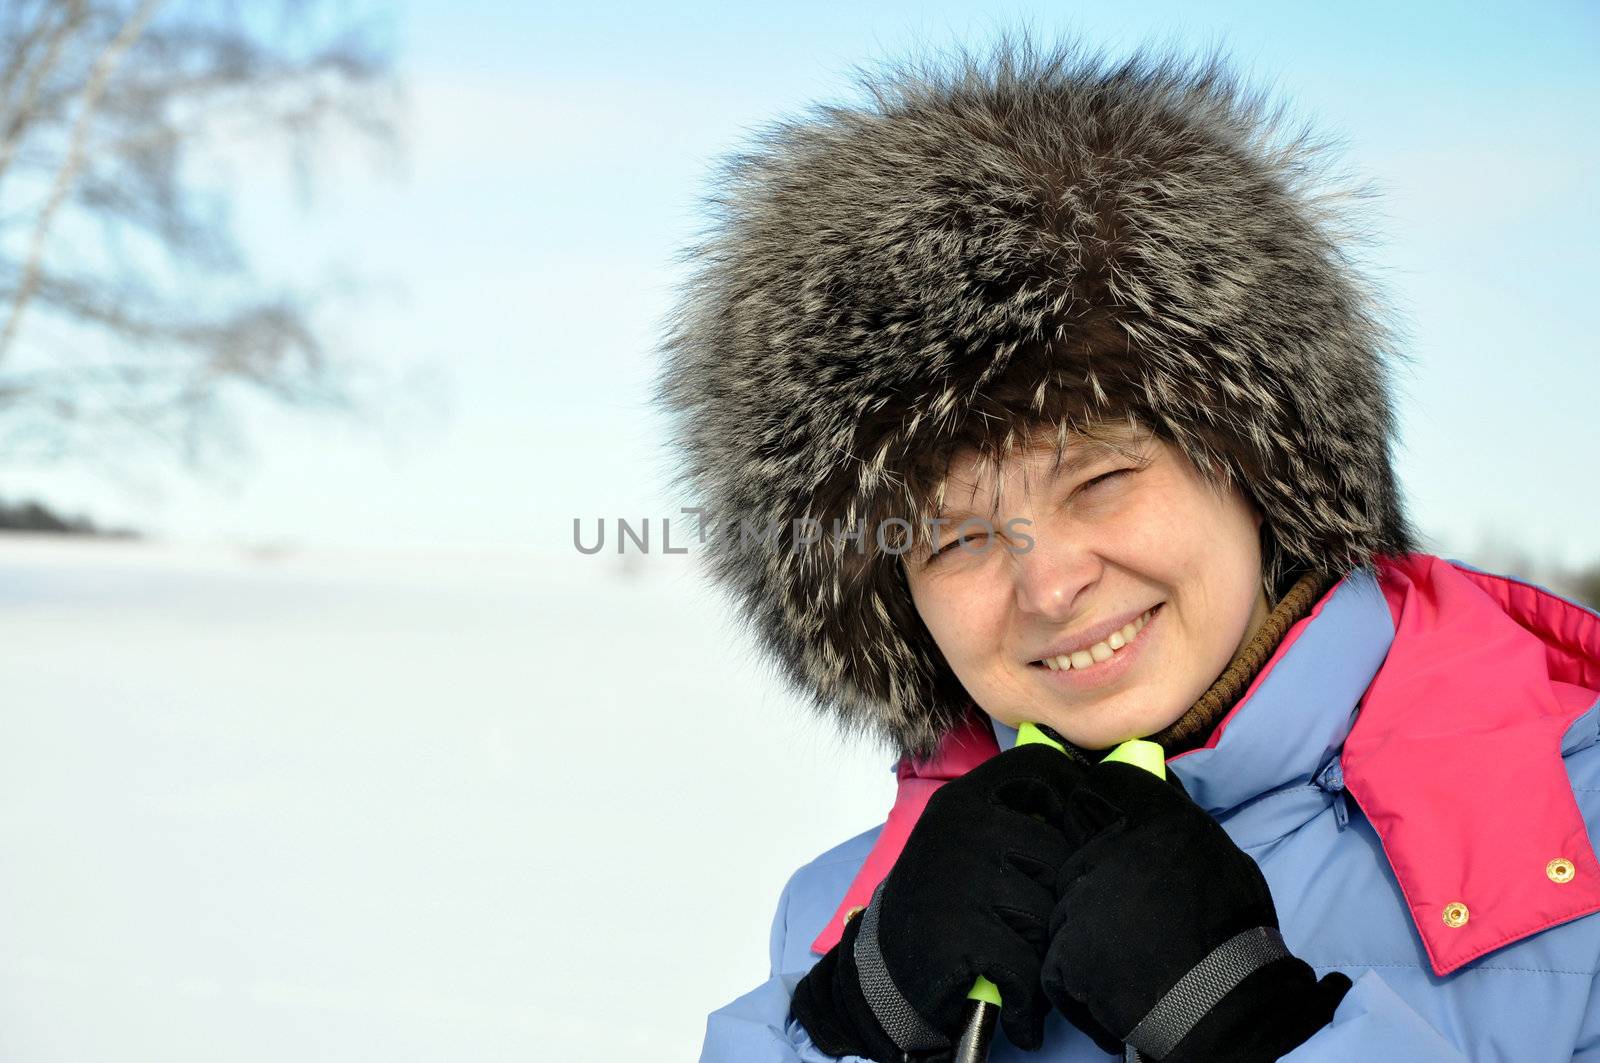  Attractive woman with ski over winter background in january